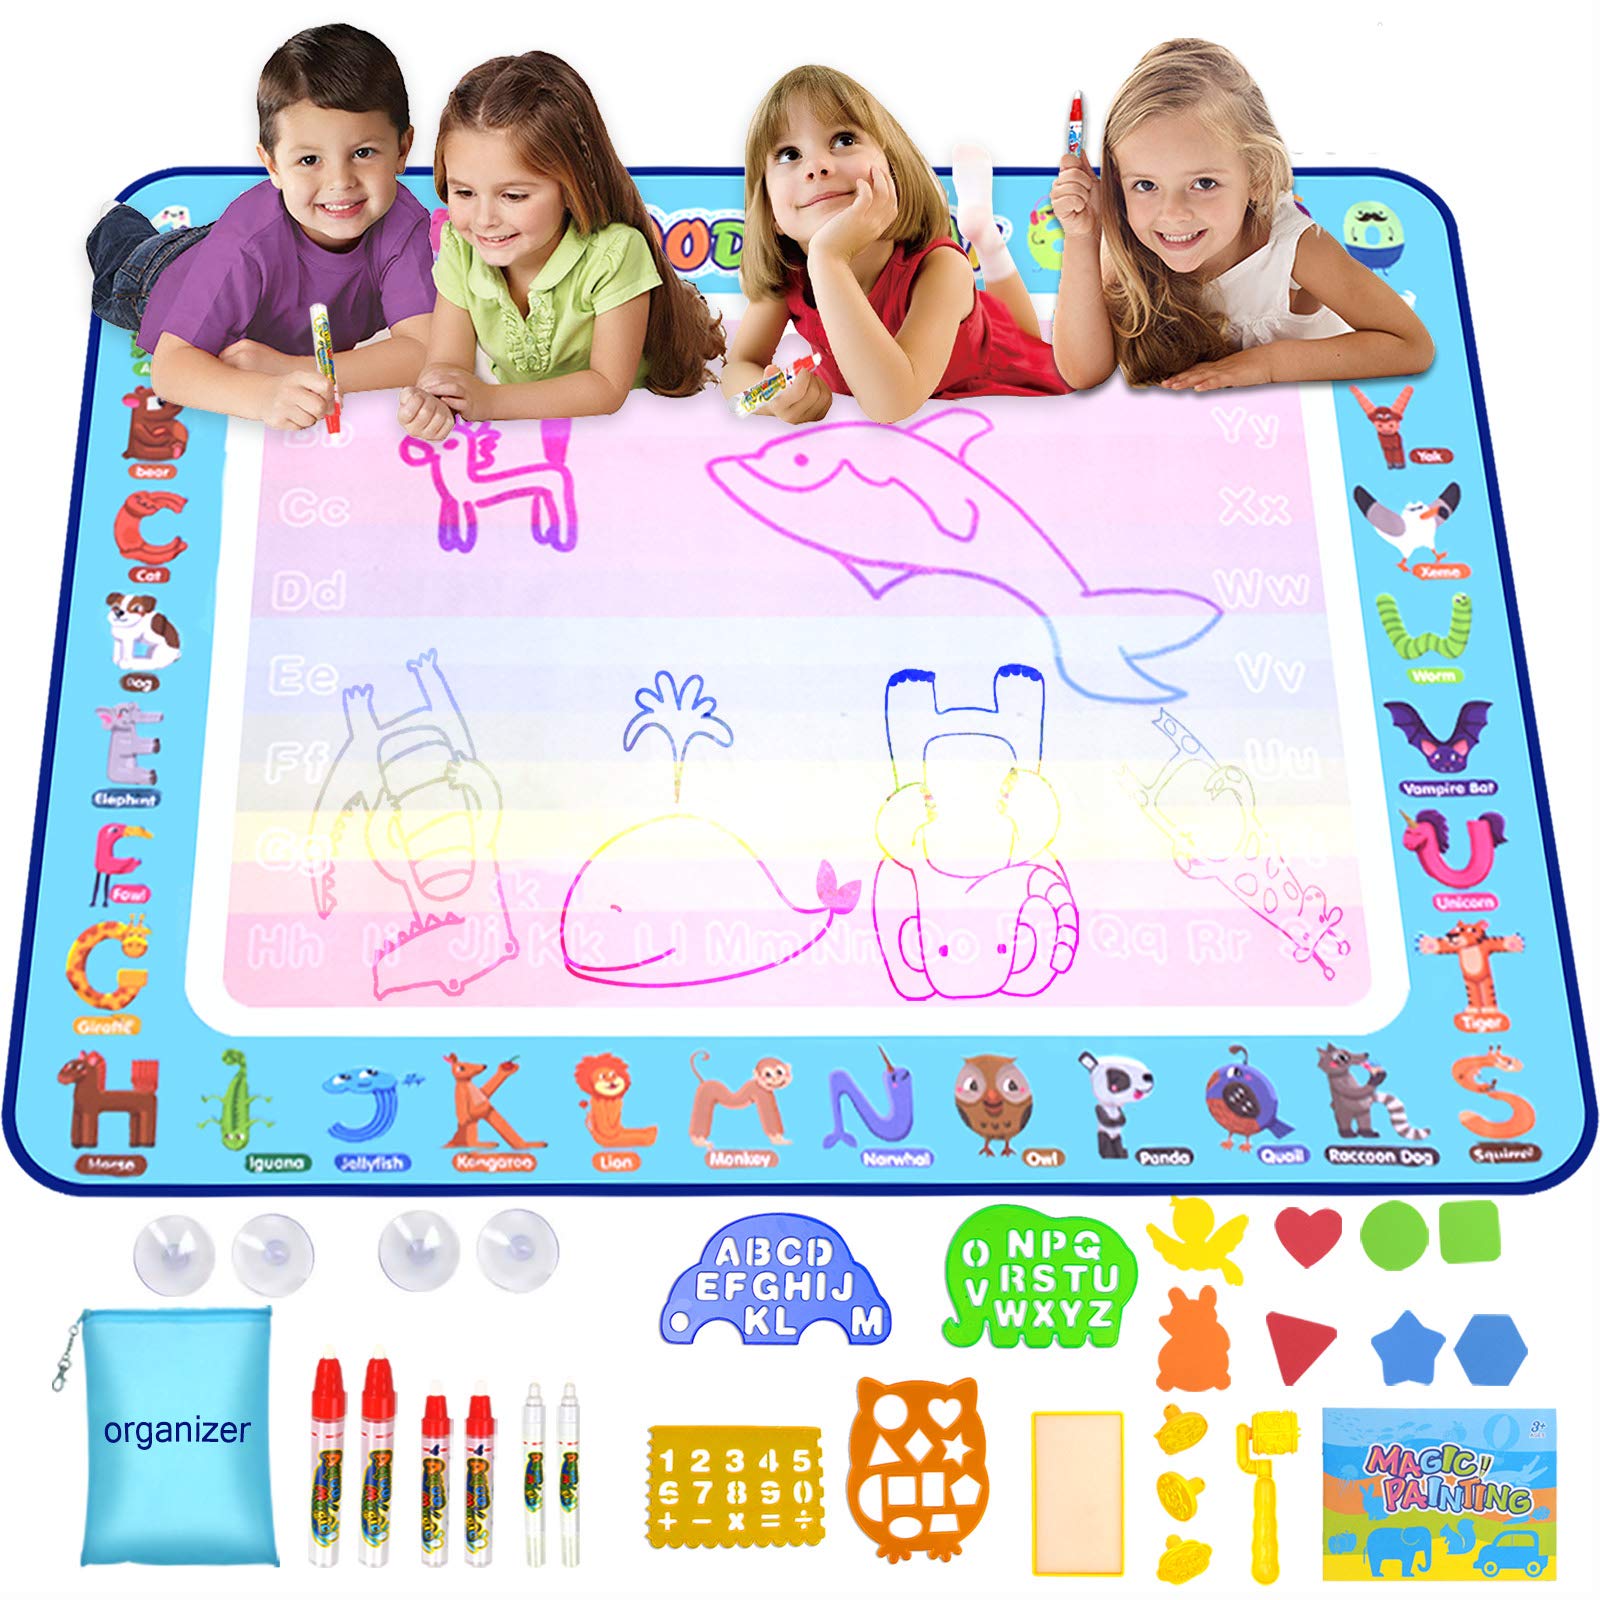 Doodle Mat Large Water Writing Doodle Drawing Mat Neon Colors Board with Drawing Accessories for Kids Toys Toddlers Educational Girls Boys